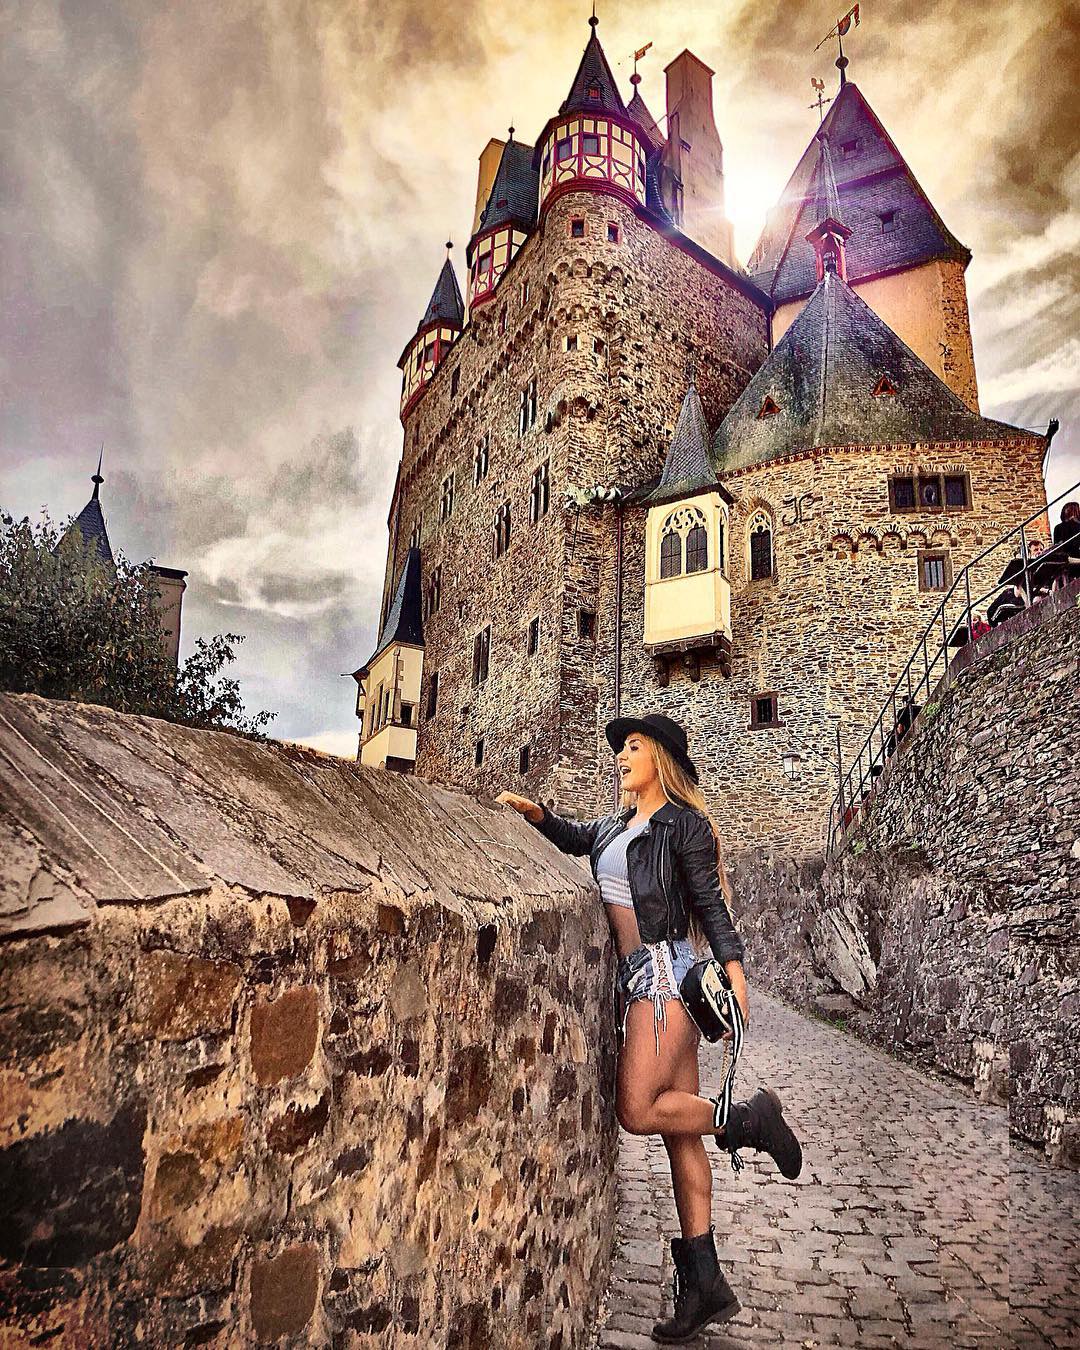 Ad/Werbung 🏰 Burg Eltz - a really magical place 🧙🏻‍♀️- a witness of the Middle Ages! Every stone has a gloomy story to tell of a long gone time ❤️ it’s up to your imagination to hear it 🧙🏻‍♀️
.
If you want to go there, avoid the weekends as there are loads of people and you won’t have a chance to take a picture without other peeps on it. Go on weekdays in the morning and if it’s a cloudy or rainy day you’ll be almost alone 👌🏻📸 good luck 🍀 .
.
.
.
.
#burgeltz #germany #sharegermany #visitgermany #beautifulgermany #burg #middleages #gloomy #fortress #travel #travelblogger #travelgram #travelgermany #travelguide #travelphotography #tripadvisor #reisetips #reisen #reiseblogger #deutschland #mittelalter #adventuretime #exploremore #roamtheplanet #nomad #globetrotter #travelista #travelgirl #sheisnotlost